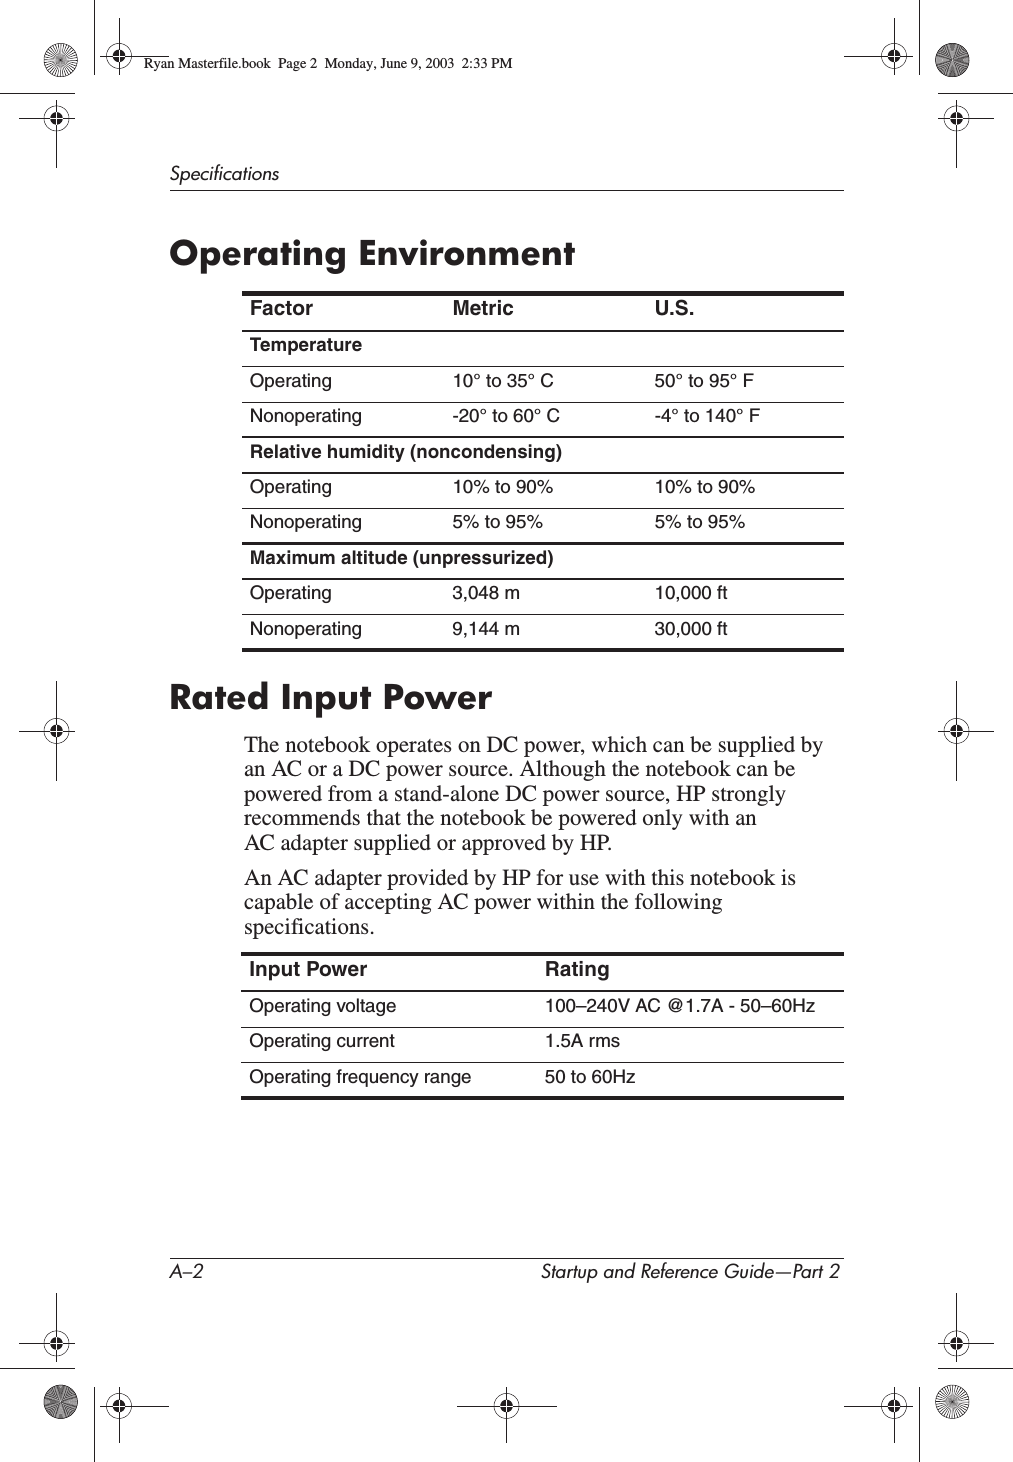 A–2 Startup and Reference Guide—Part 2SpecificationsOperating EnvironmentRated Input PowerThe notebook operates on DC power, which can be supplied by an AC or a DC power source. Although the notebook can be powered from a stand-alone DC power source, HP strongly recommends that the notebook be powered only with an AC adapter supplied or approved by HP.An AC adapter provided by HP for use with this notebook is capable of accepting AC power within the following specifications.Factor Metric U.S.TemperatureOperating 10° to 35° C 50° to 95° FNonoperating -20° to 60° C -4° to 140° FRelative humidity (noncondensing)Operating 10% to 90% 10% to 90%Nonoperating 5% to 95% 5% to 95%Maximum altitude (unpressurized)Operating 3,048 m 10,000 ftNonoperating 9,144 m 30,000 ftInput Power RatingOperating voltage 100–240V AC @1.7A - 50–60HzOperating current 1.5A rmsOperating frequency range 50 to 60HzRyan Masterfile.book  Page 2  Monday, June 9, 2003  2:33 PM